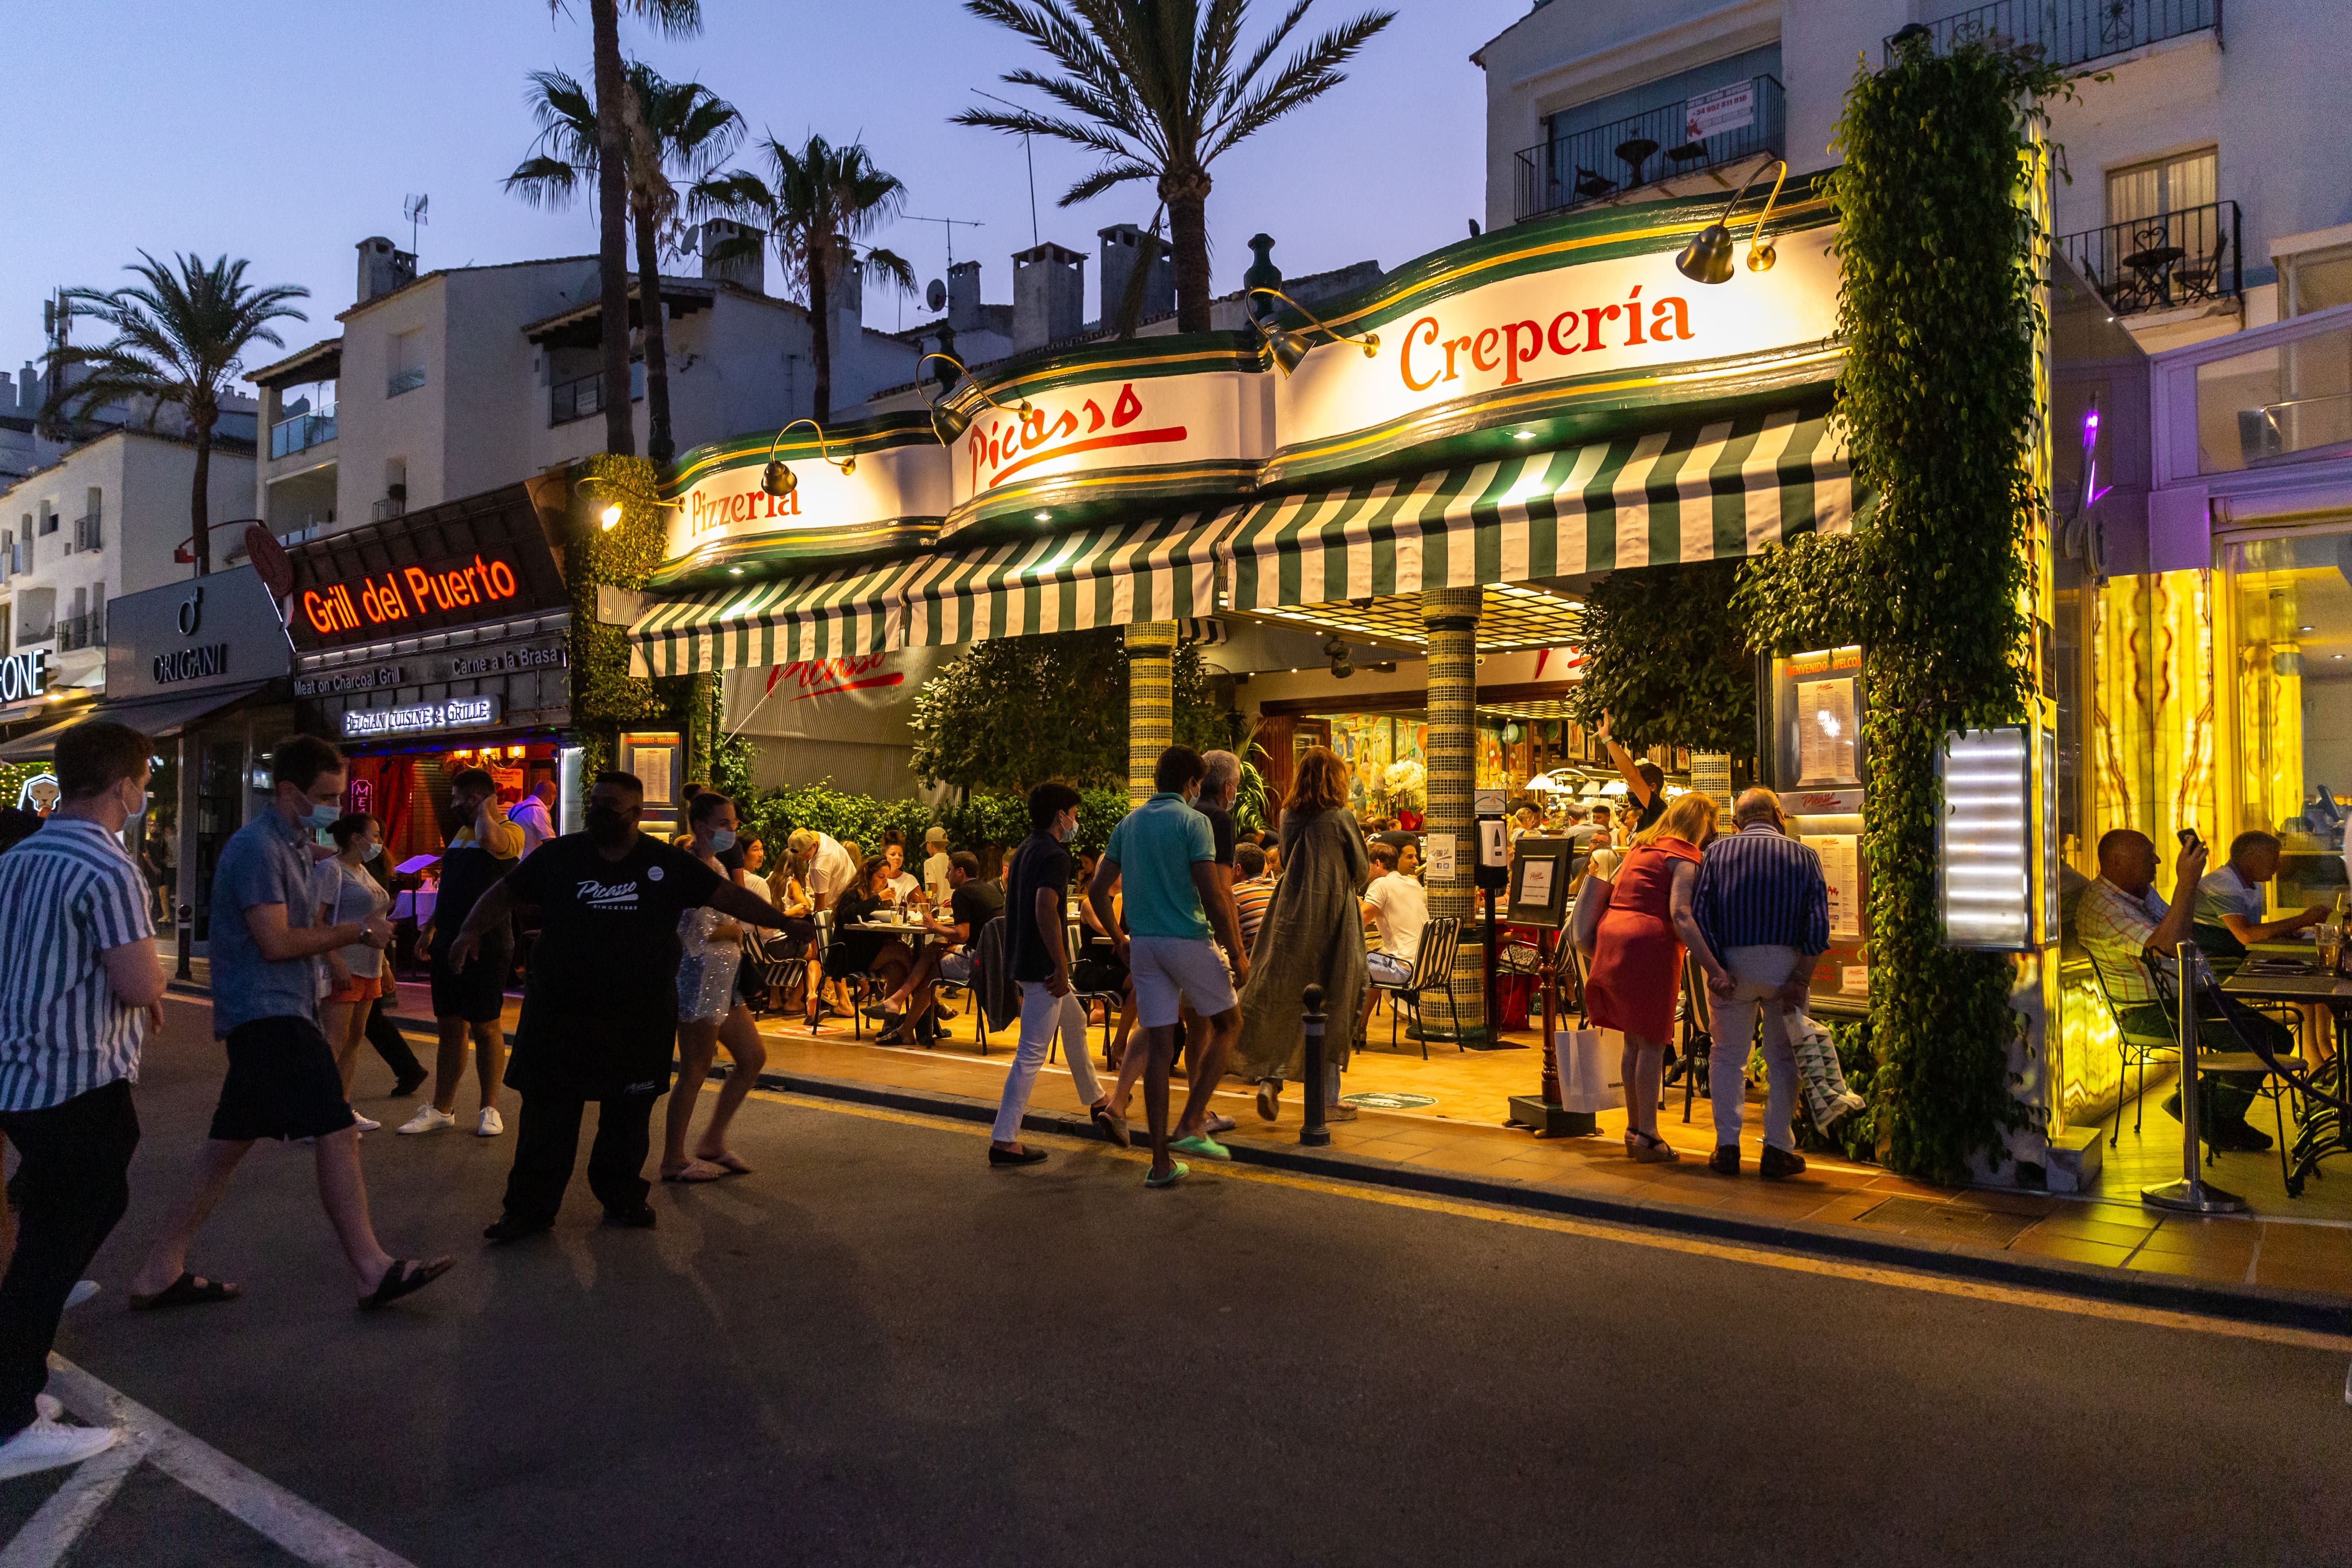 Busy Spanish street at nighttime with a queue of people walking into a well-lit and busy restaurant.